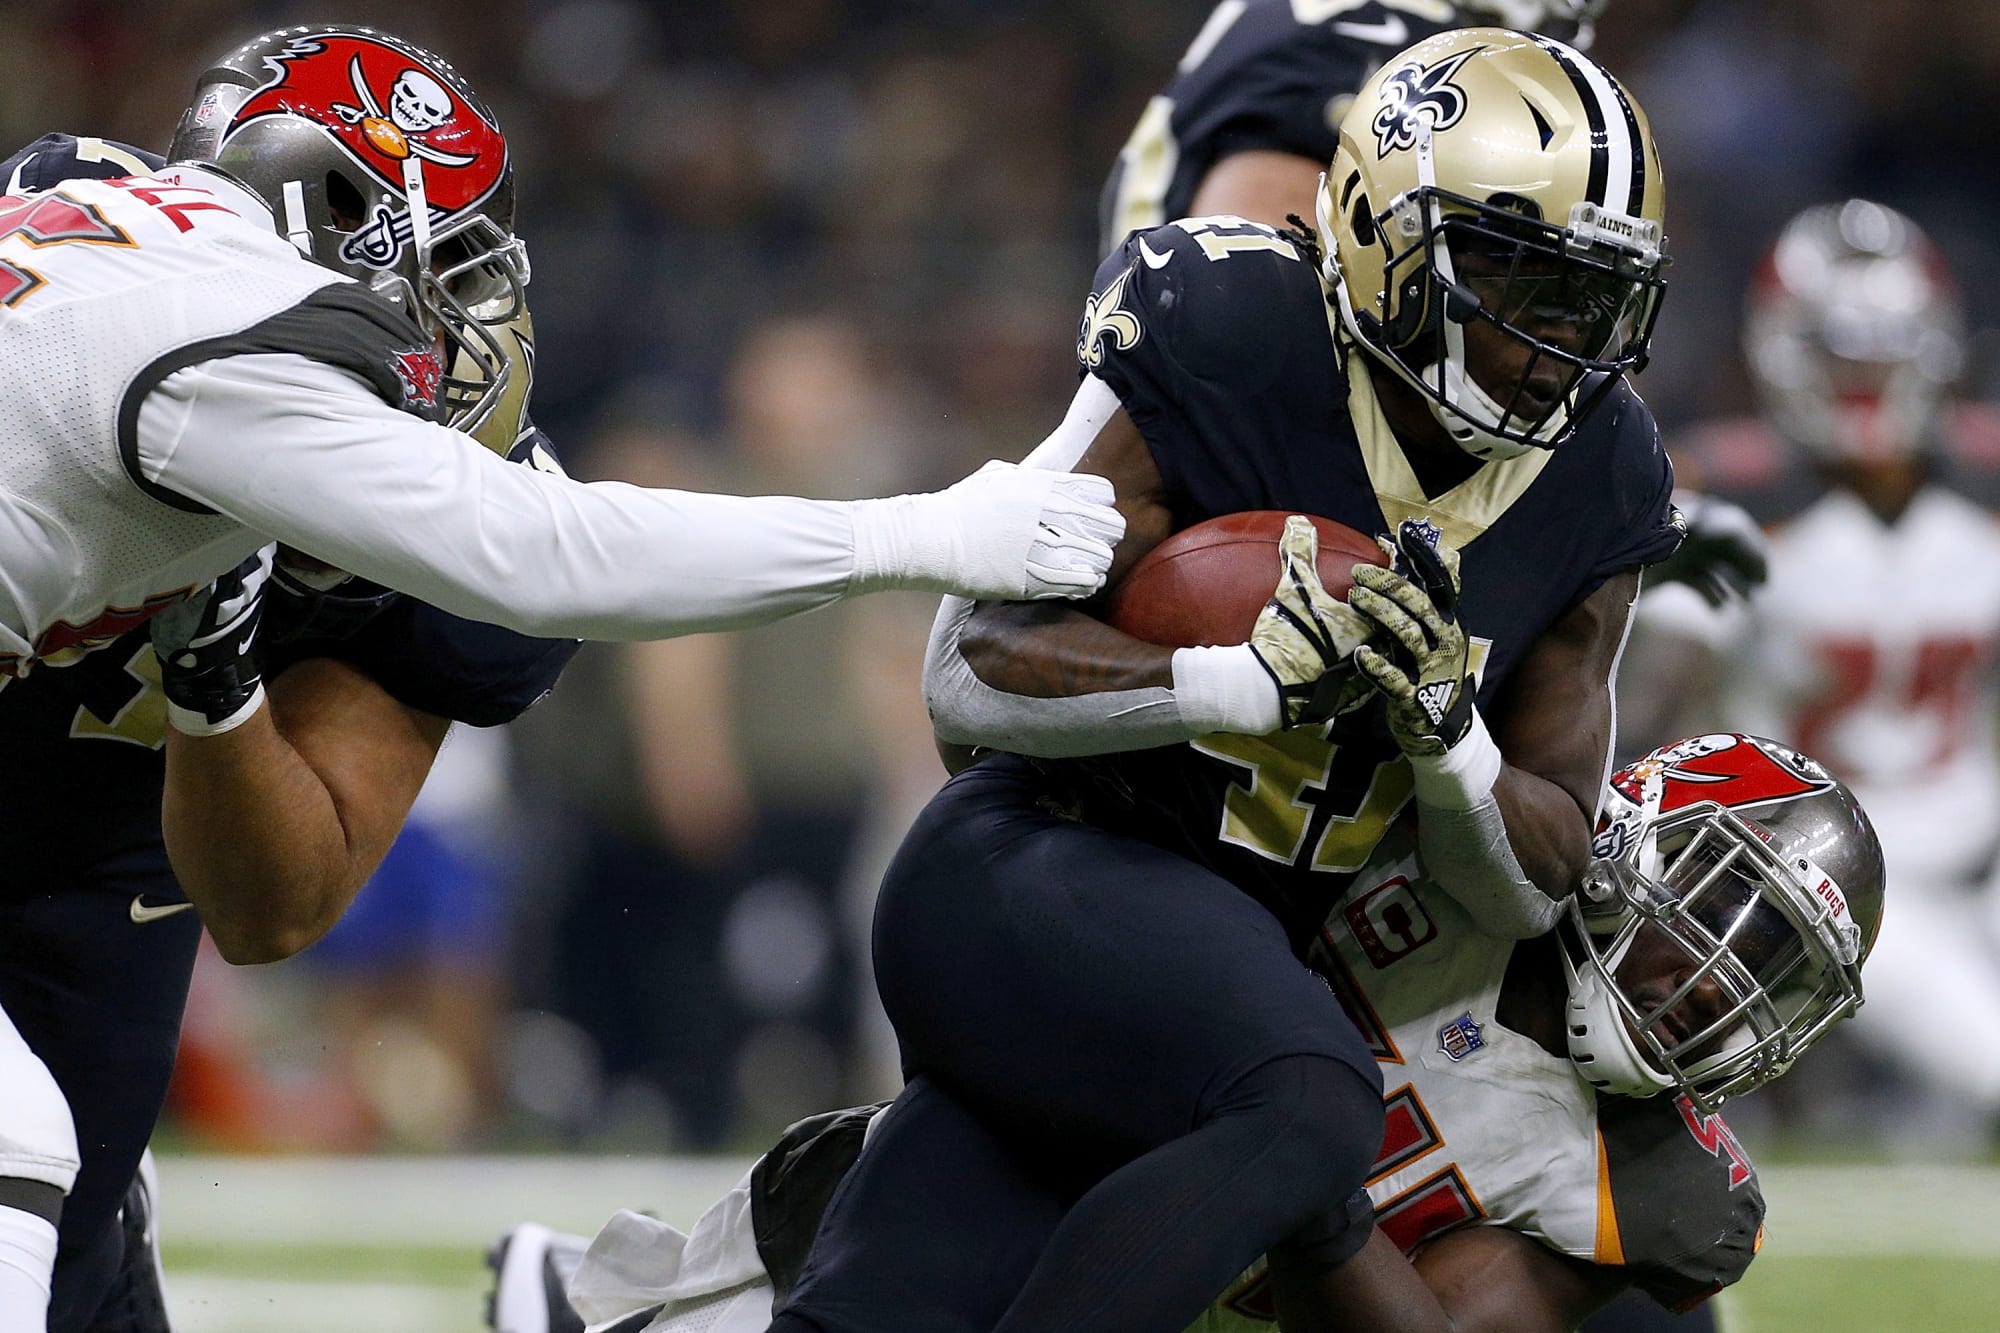 Saints, Bucs in Week 9 observations from the cheap seats